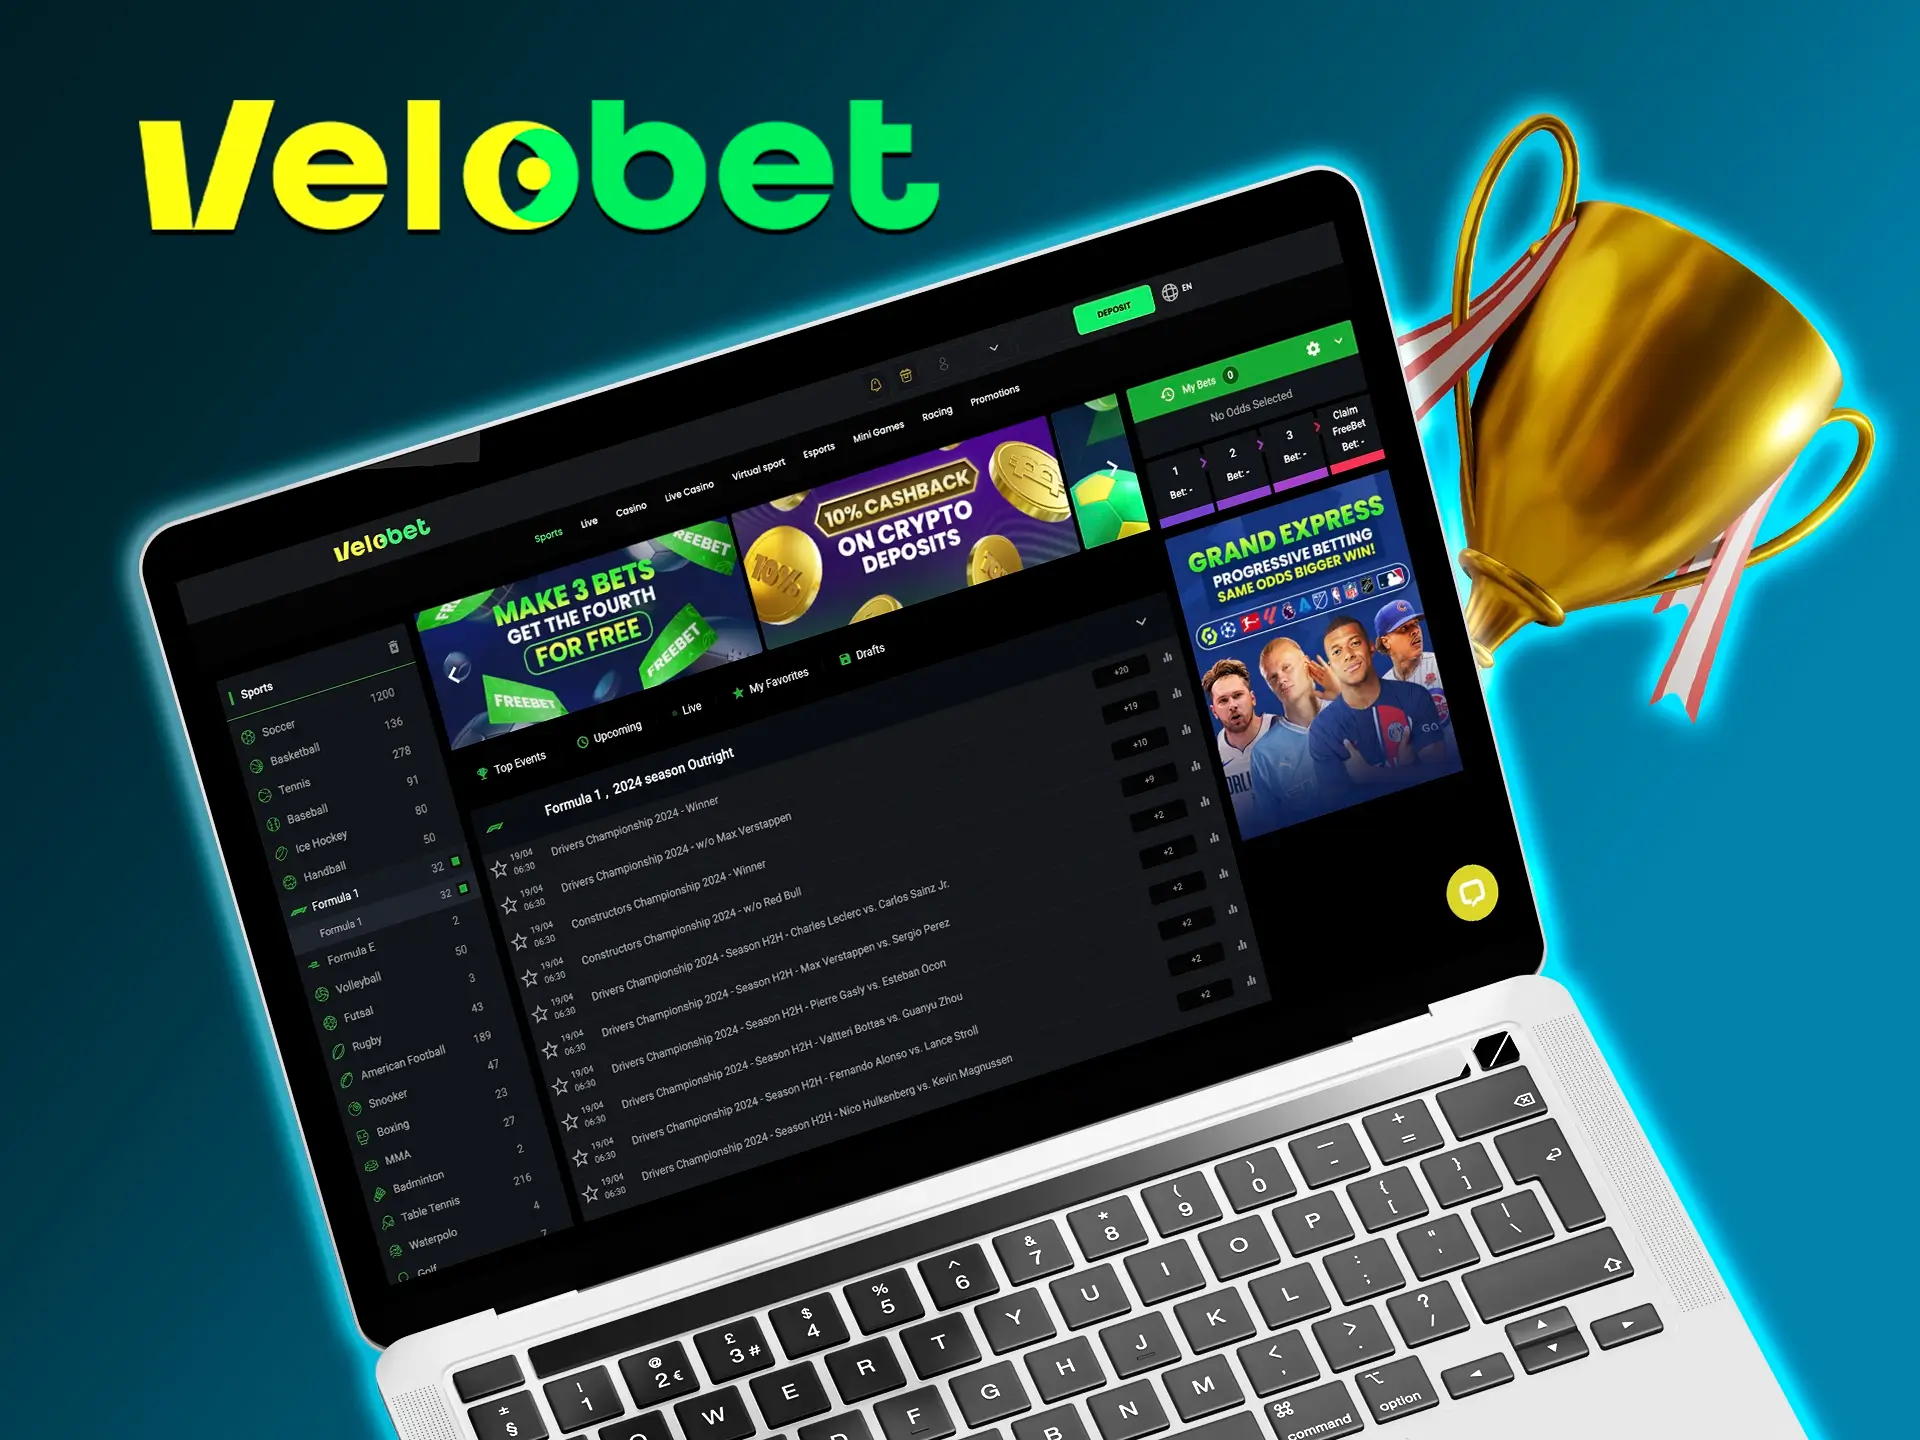 Velobet's extensive list of sports disciplines and bets will please any fan.